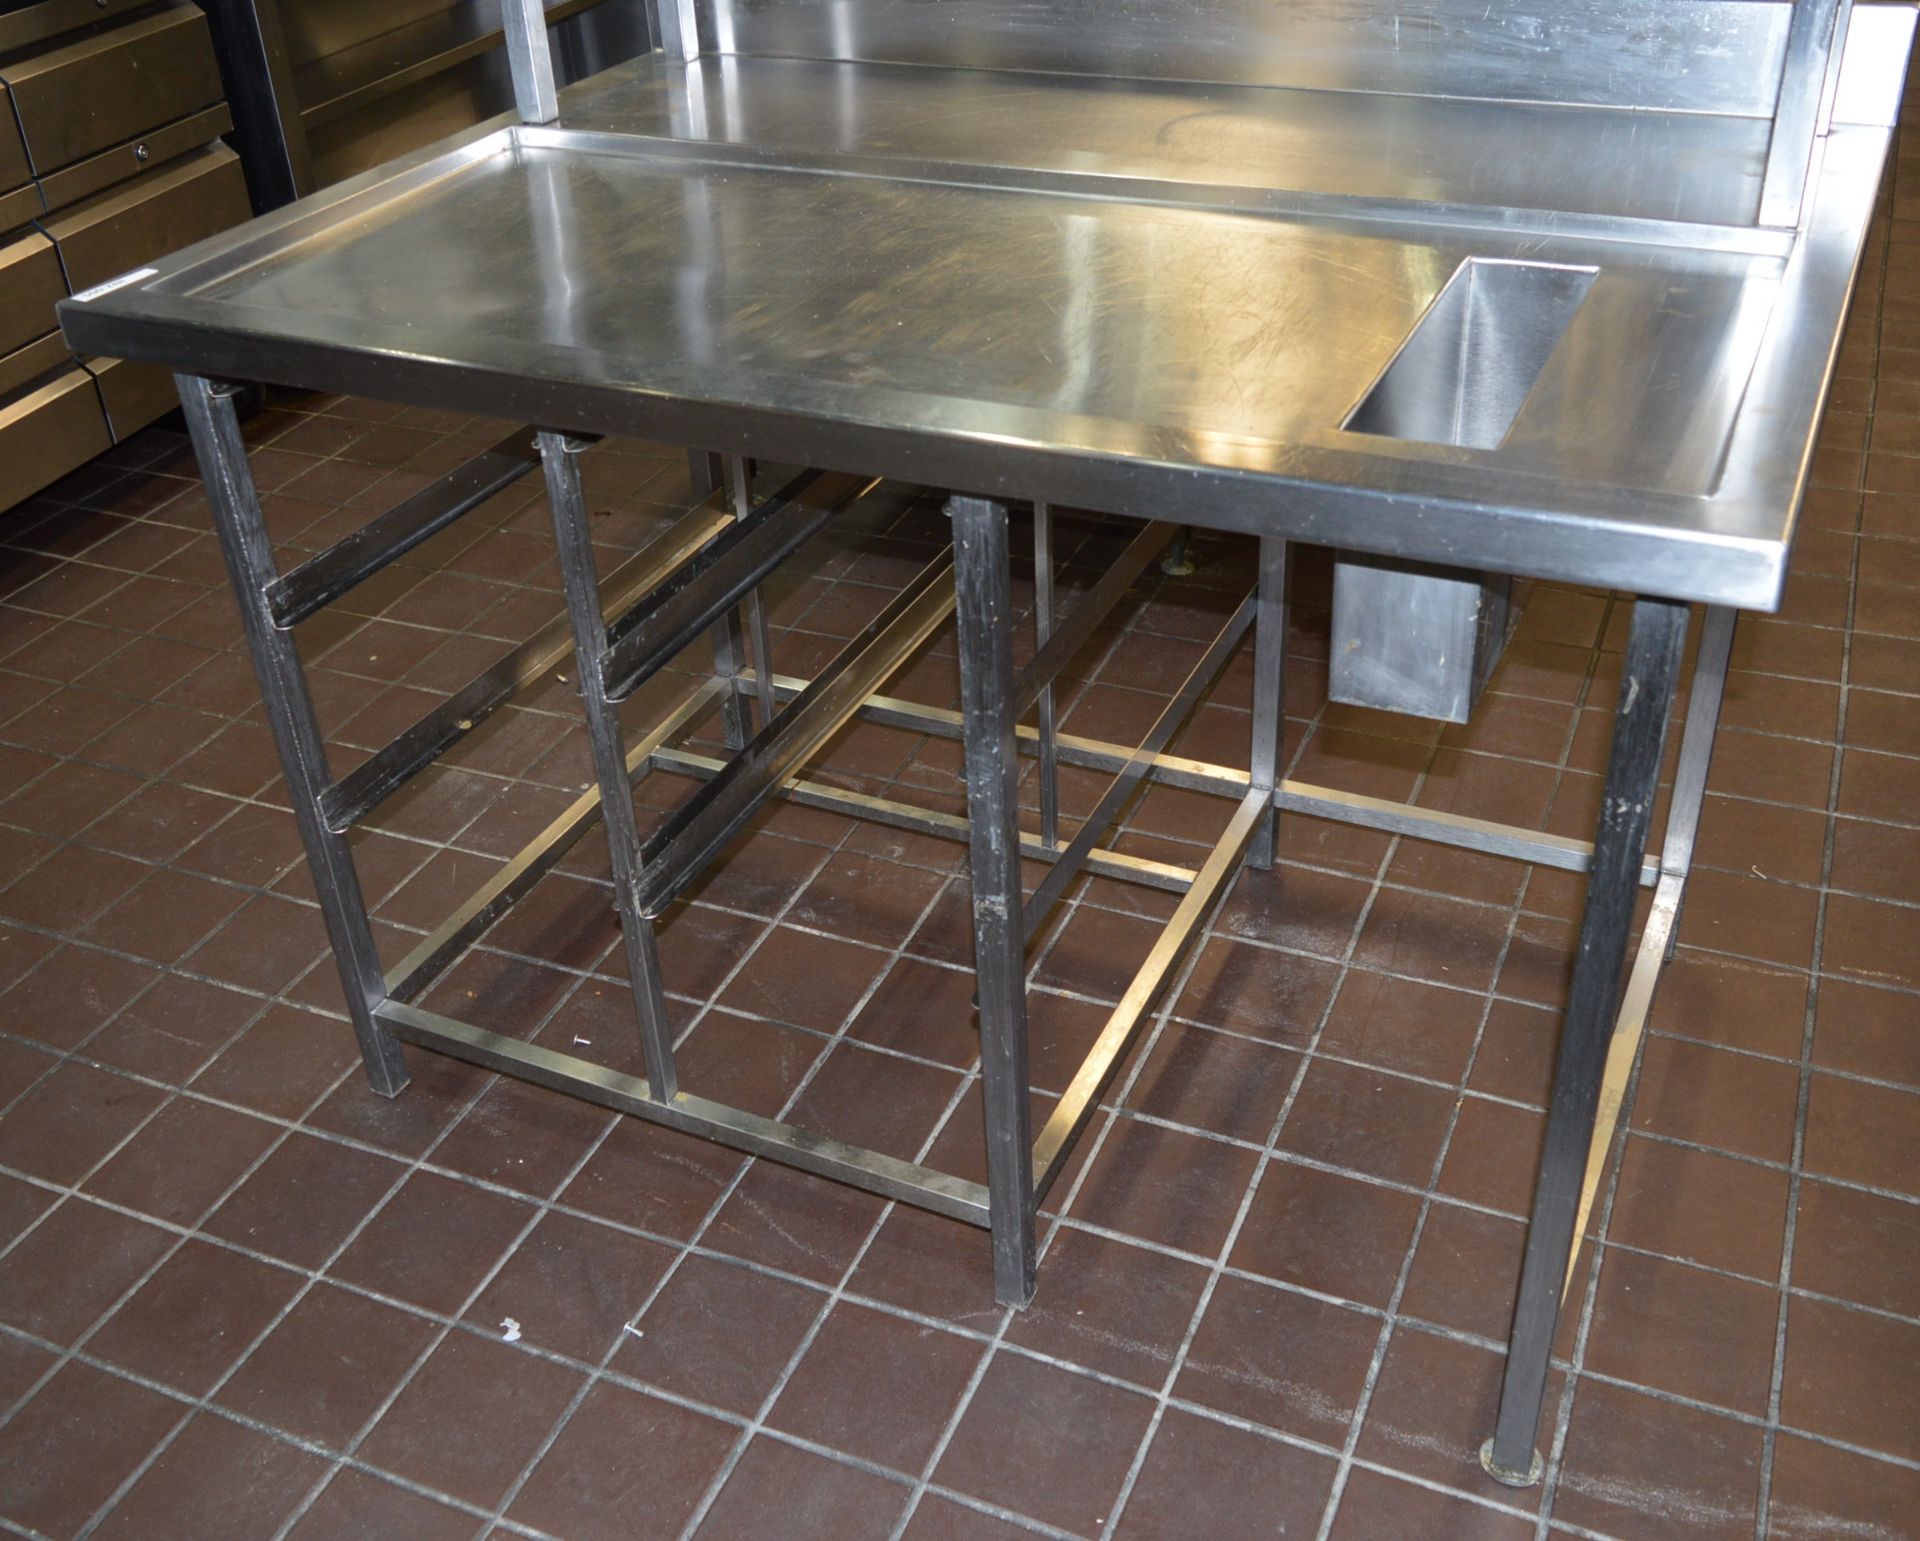 1 x Stainless Steel Prep Bench With Undercounter Shelves, Bin Chute and Overhead Shelves - H87/171 x - Image 3 of 5